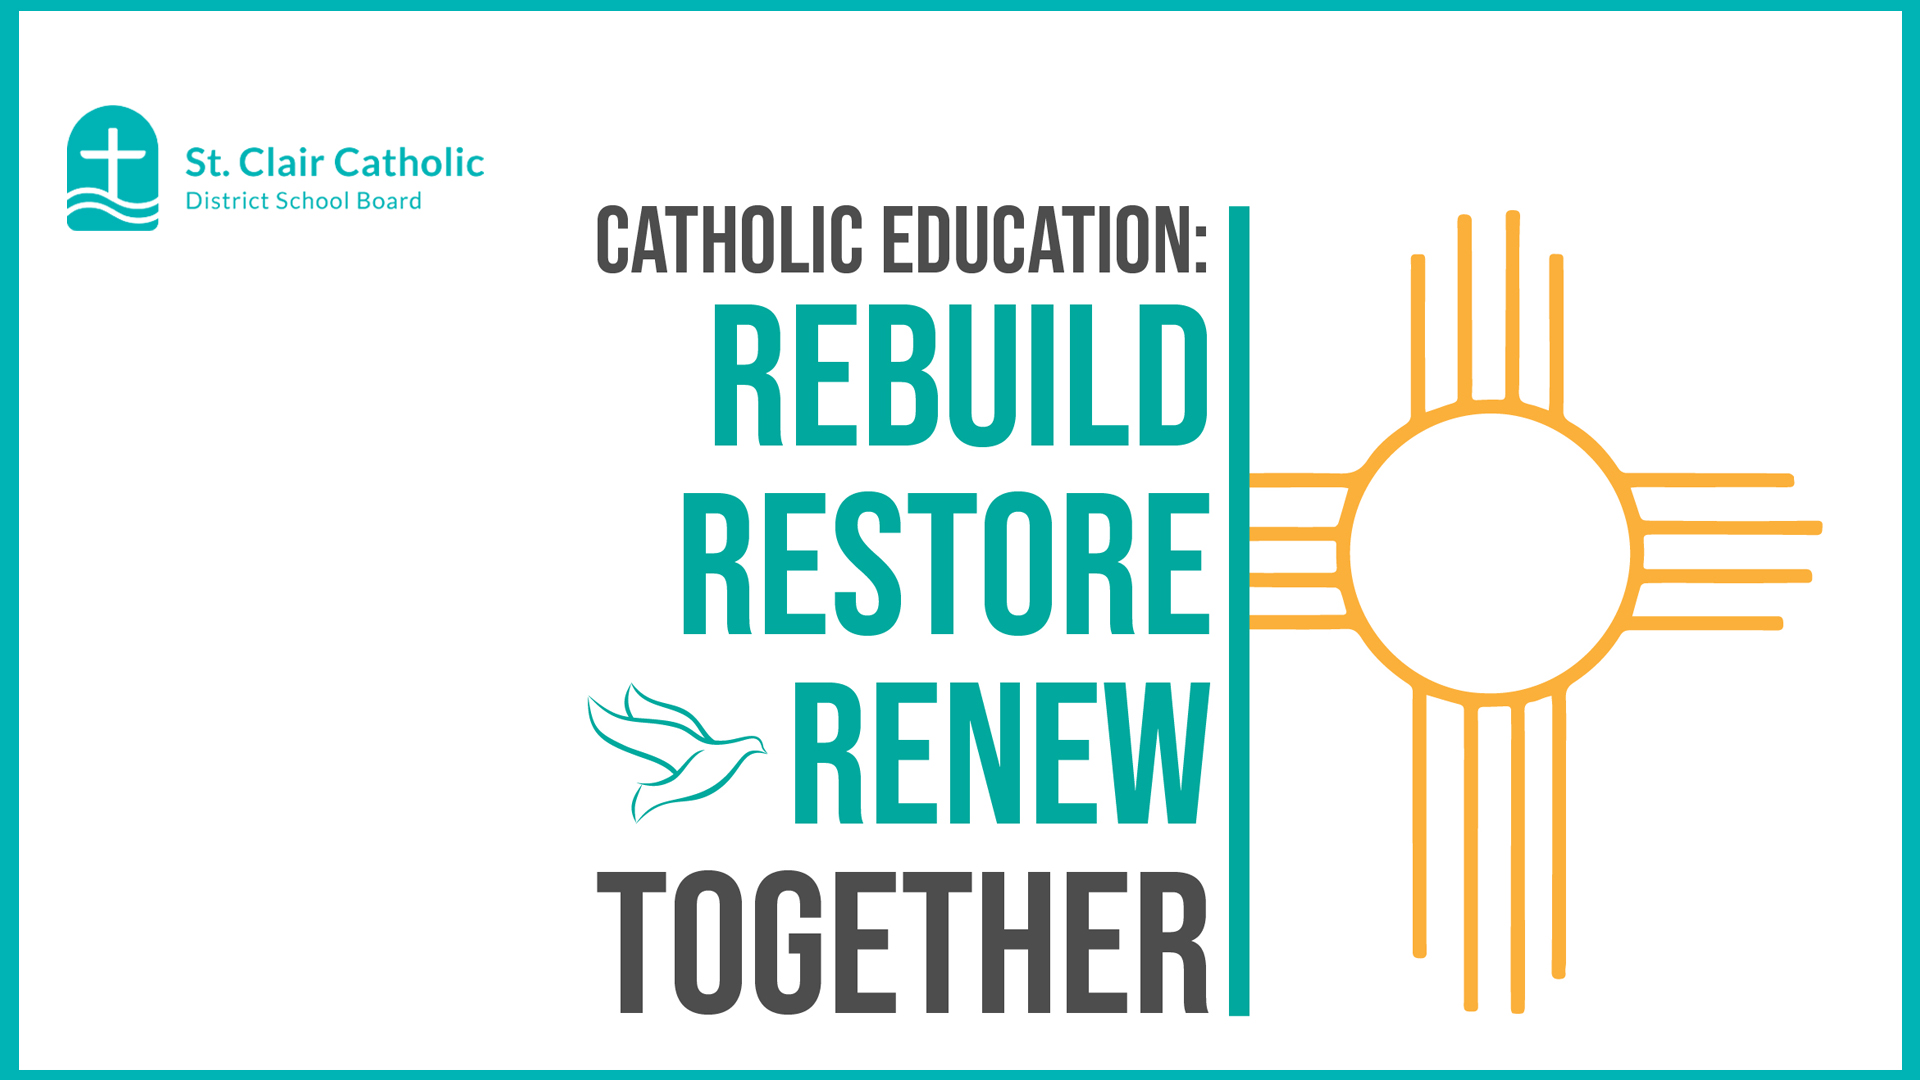 May 1 to May 6 is Catholic Education Week: Rebuild, Restore, Renew Together